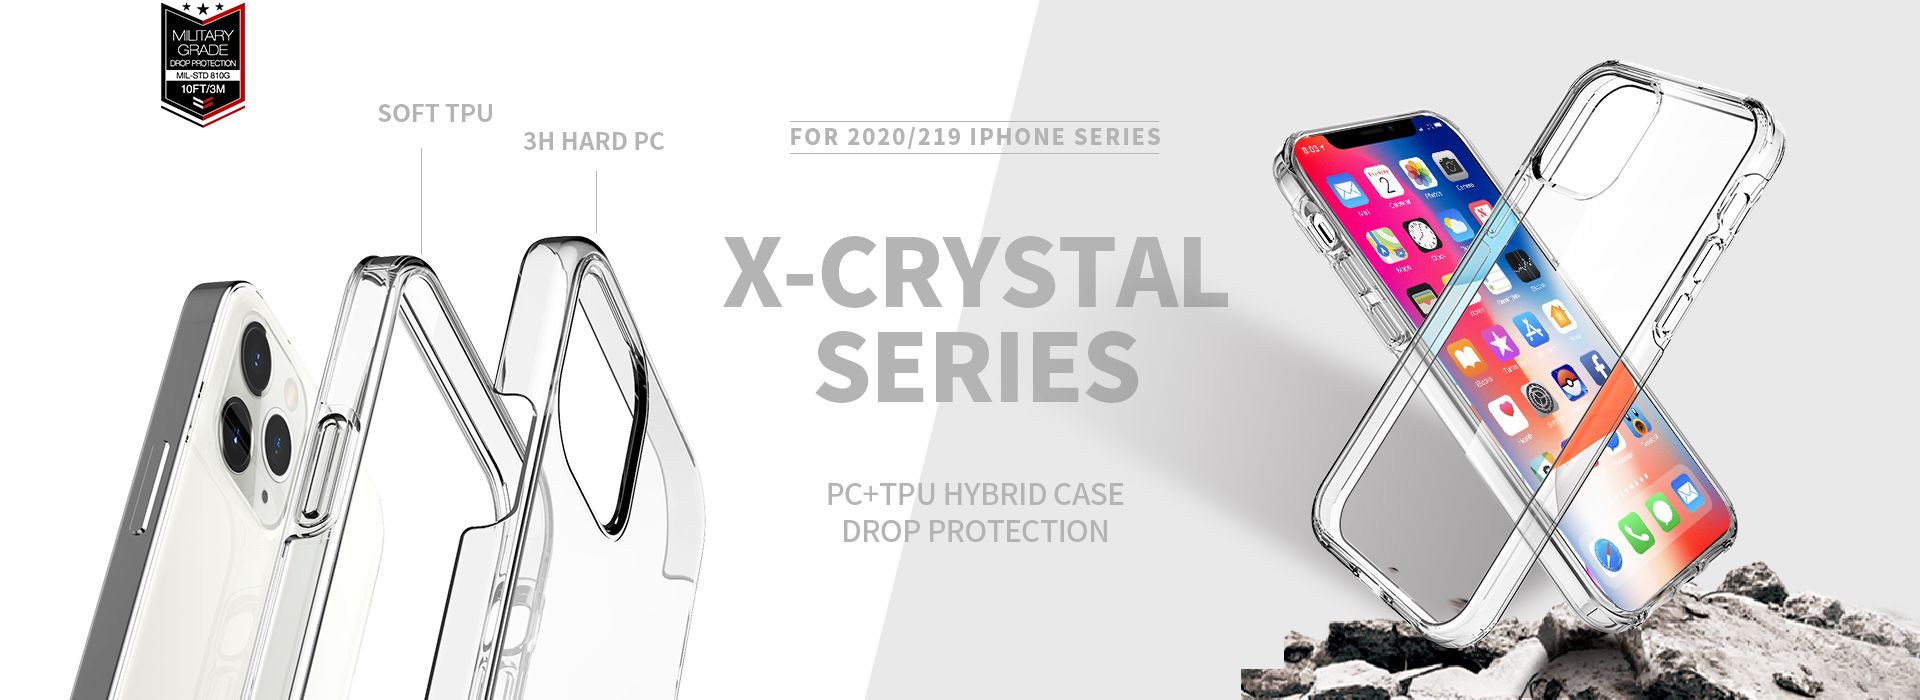 X-CRYSTAL Strong Protection Case